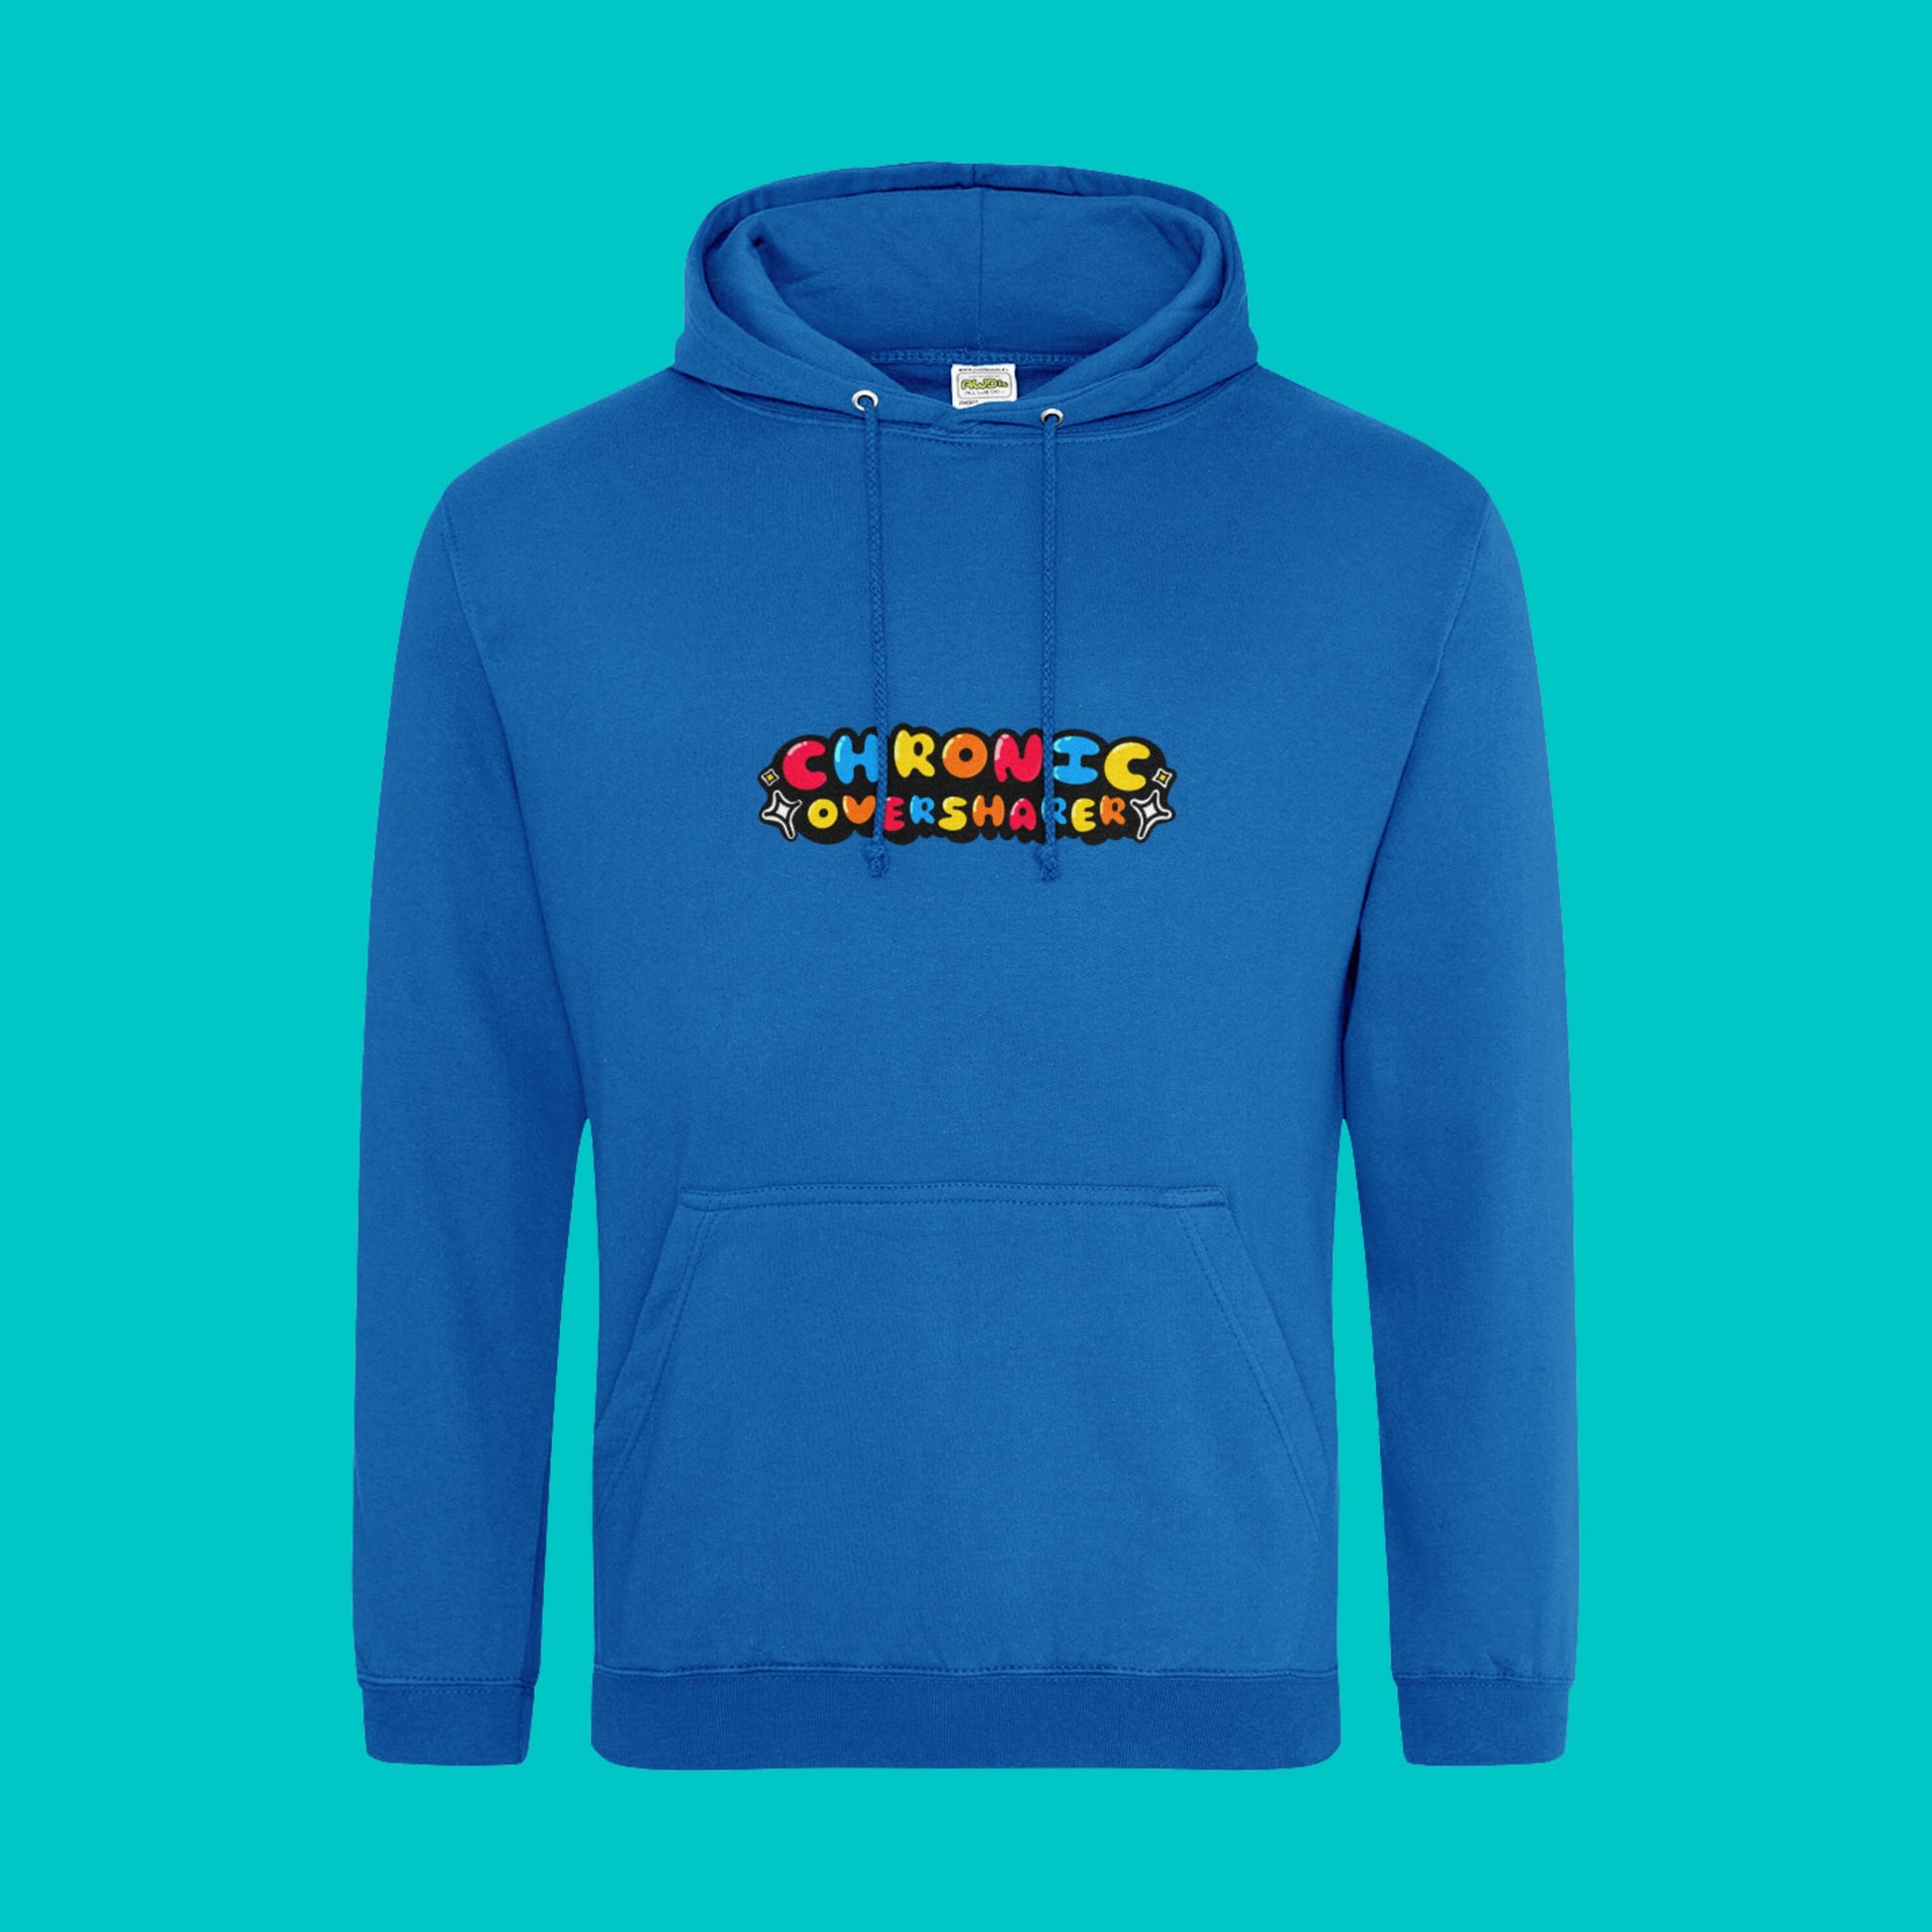 The Chronic Over Sharer Sapphire Blue Hoodie shown on a blue background. The sapphire blue hoodie features a drawstring hood, a large front pocket and the text 'chronic oversharer' in rainbow bubble font with a black shadow effect and white sparkles. The design was created to raise awareness for neurodivergent disorders such as ADHD.